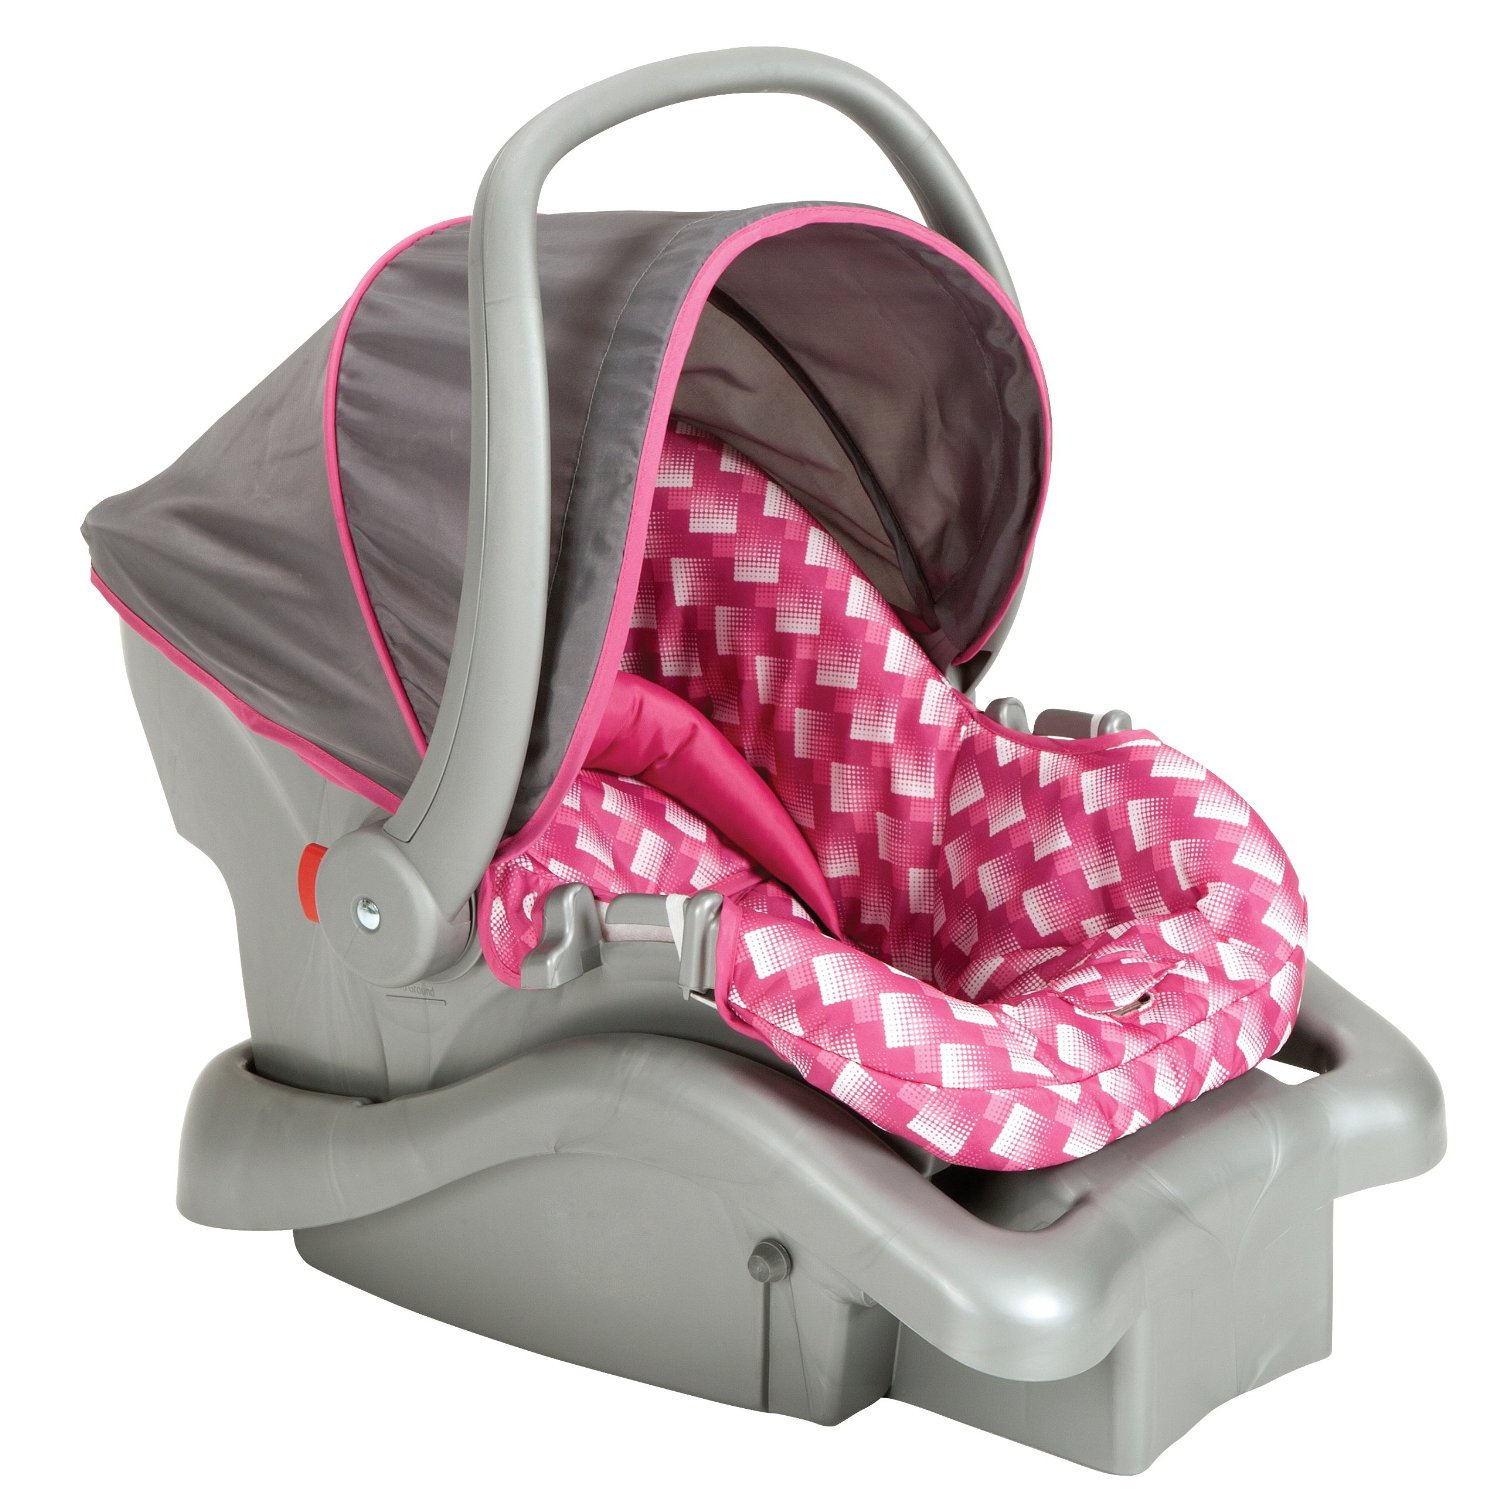 CarseatBlog The Most Trusted Source for Car Seat Reviews, Ratings